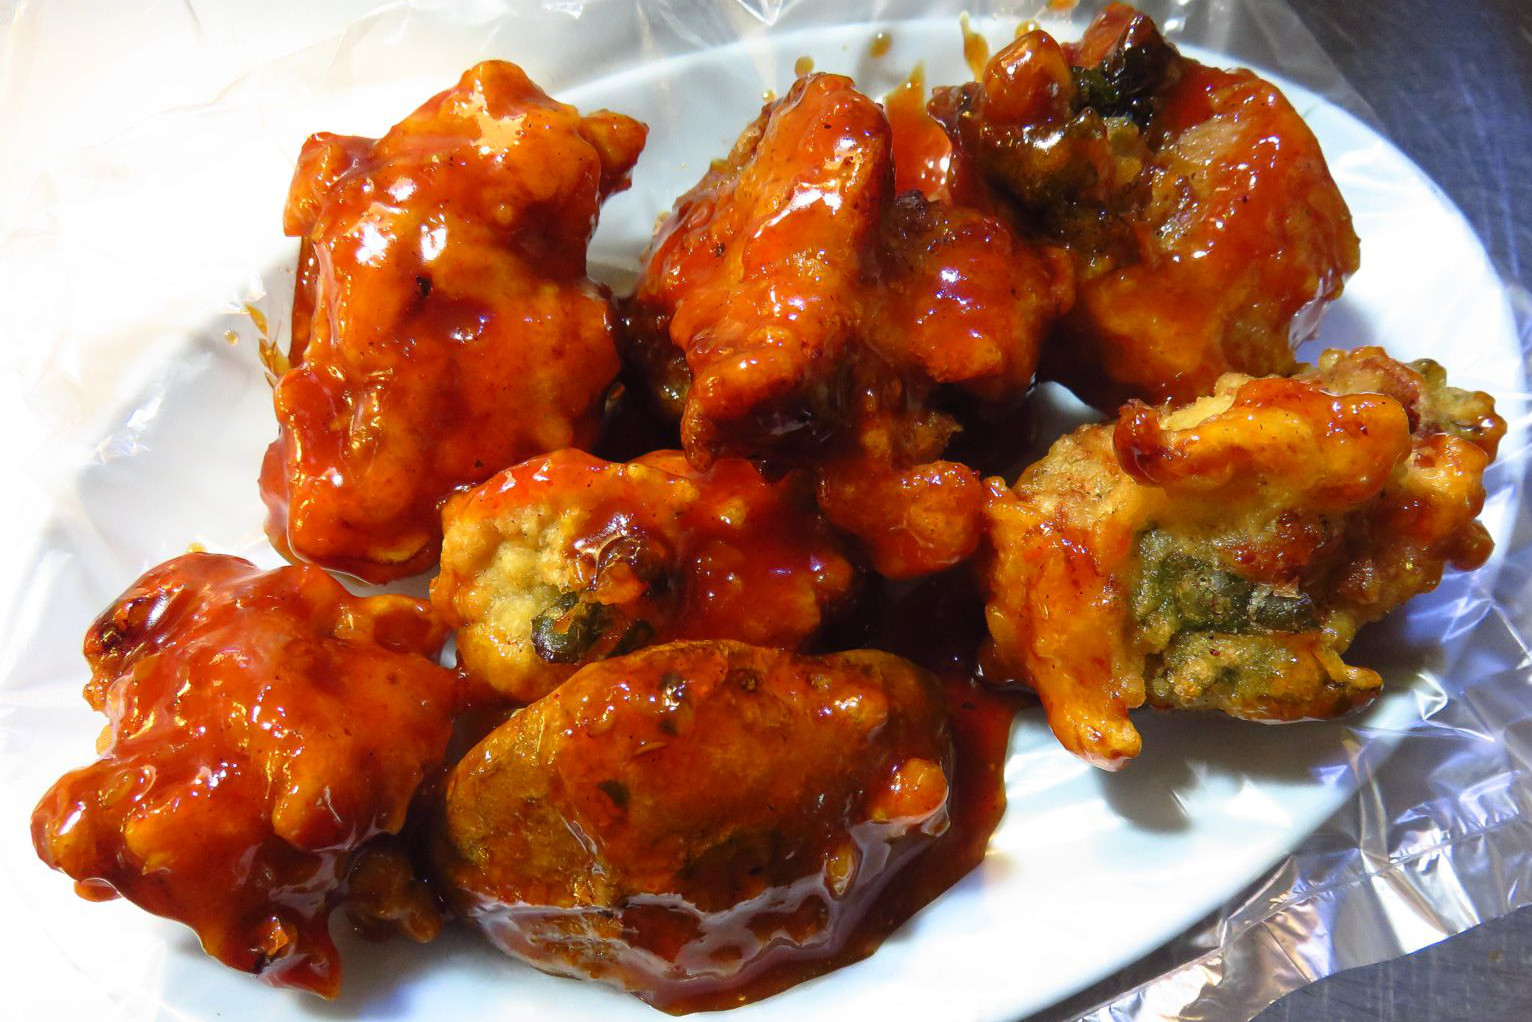 Nutritious and delicious: Korean fried chicken. Image by Phillip Tang / Lonely Planet